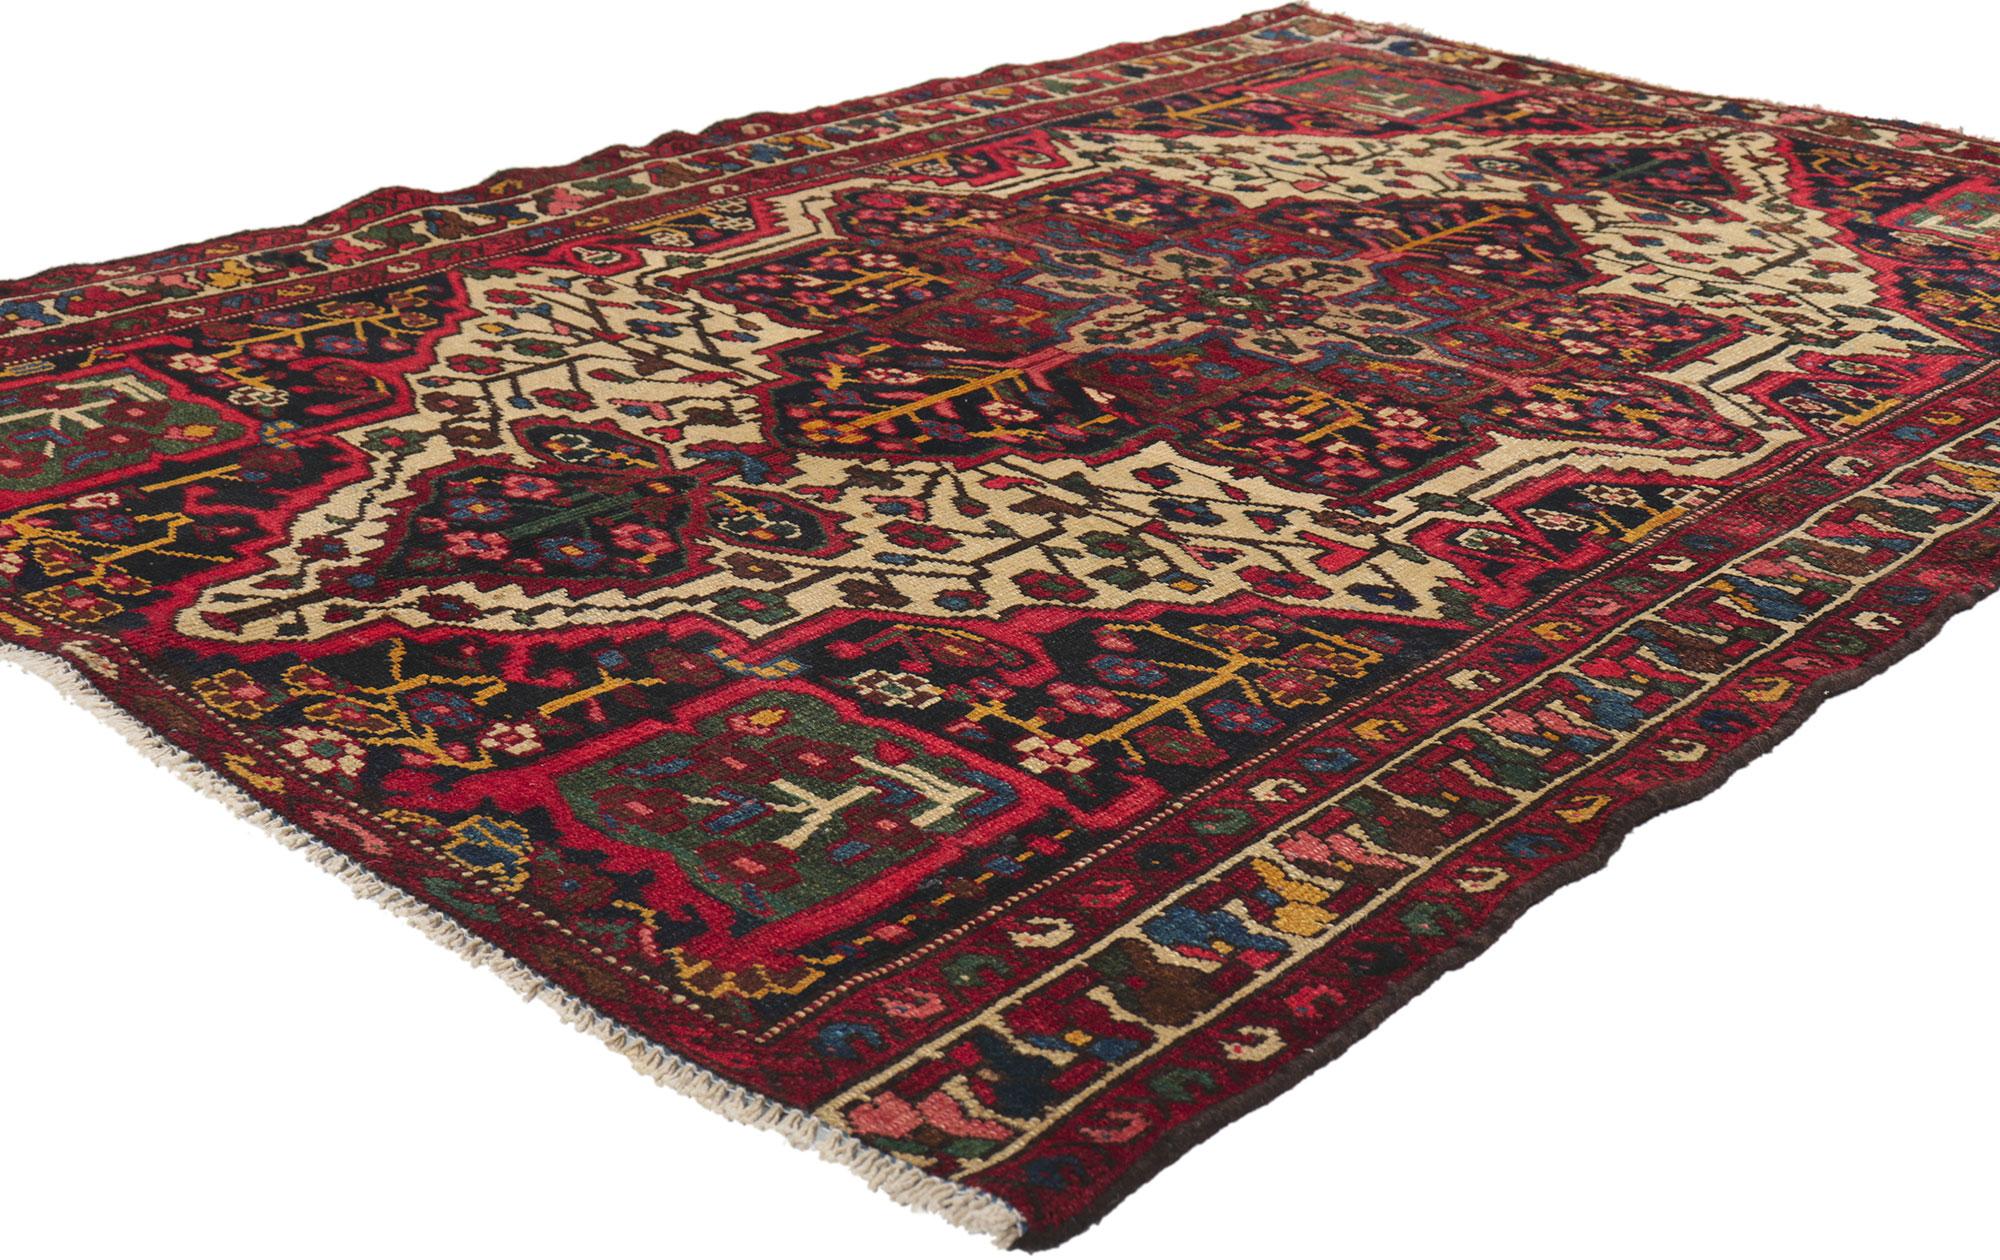 61183 Antique Persian Bakhtiari Rug, 04.04 x 06.06. With its timeless style, incredible detail and texture, this hand-knotted wool antique Persian Bakhtiari rug is poised to impress. The eye-catching medallion design and traditional color palette